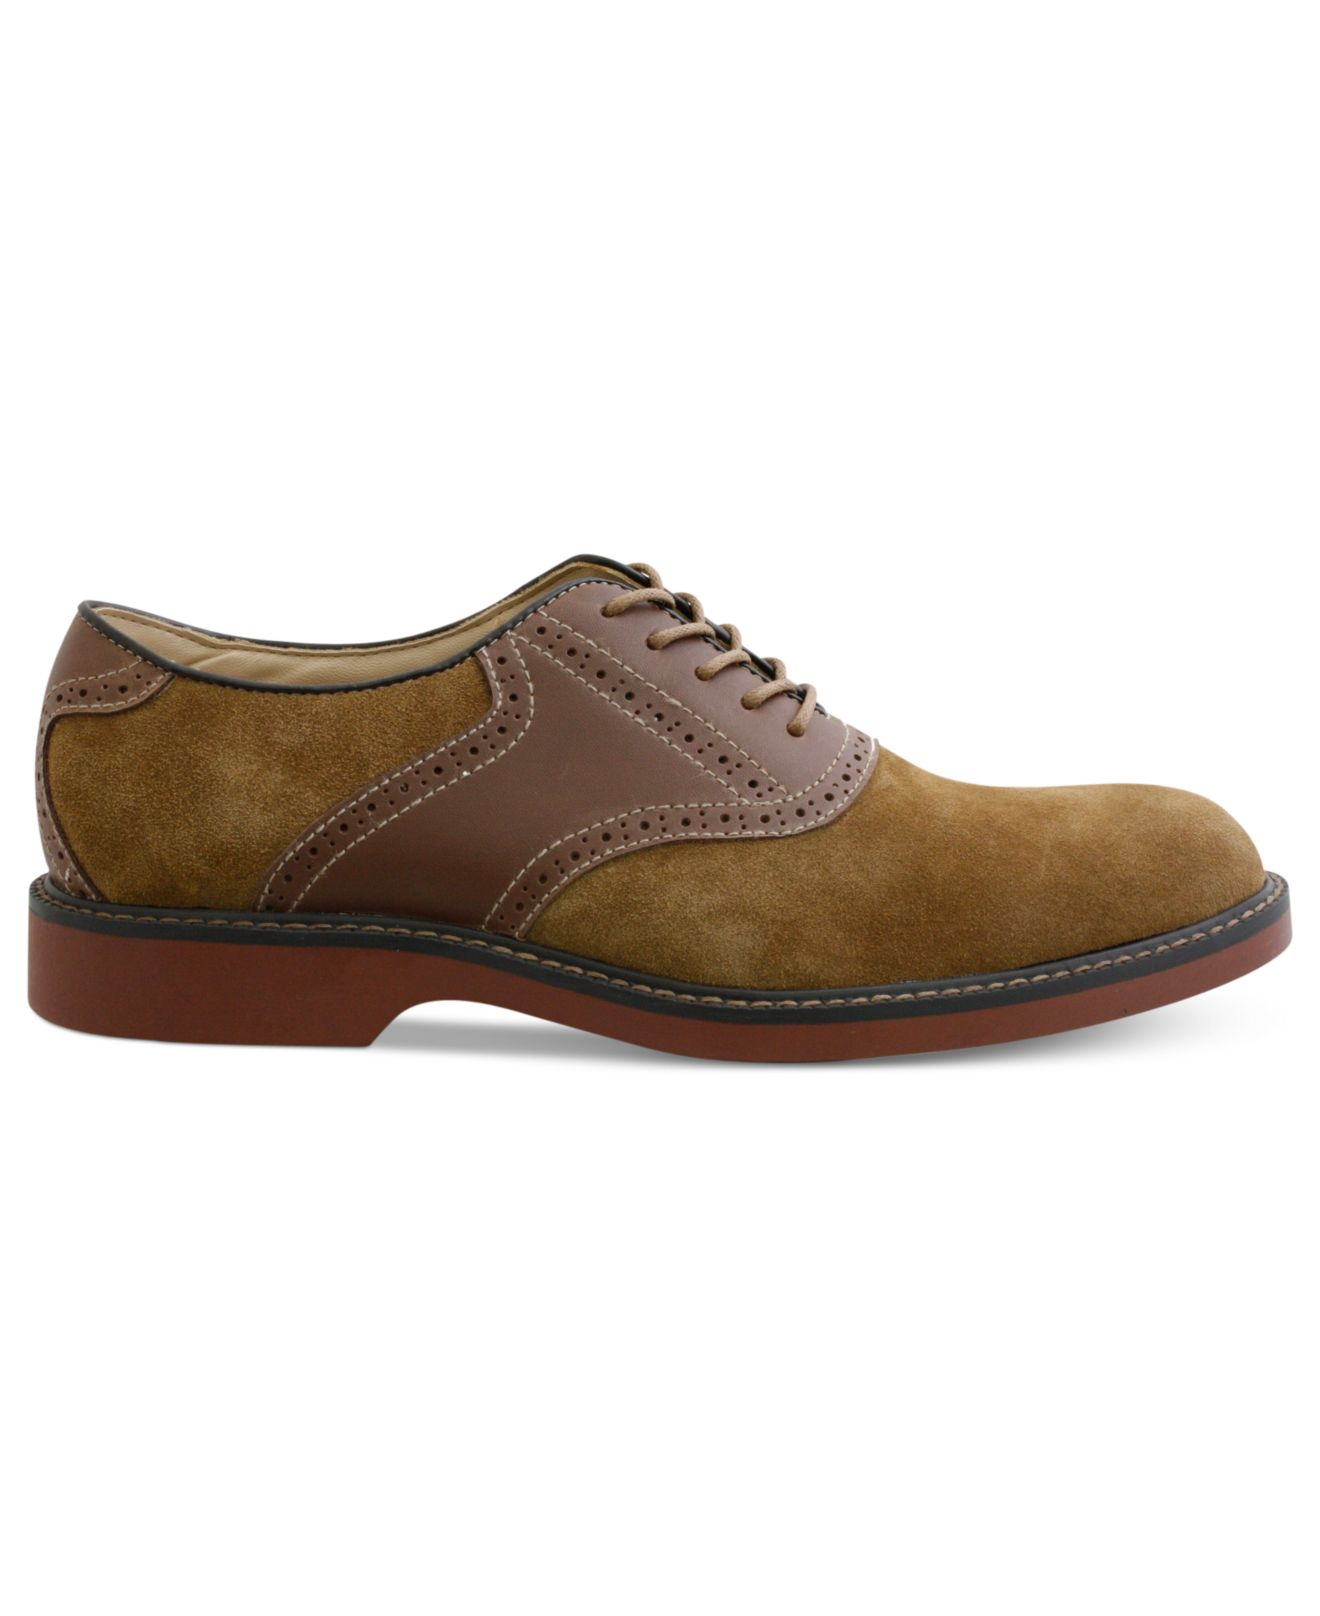 G.h. bass & co. Pomona Plain-toe Saddle Lace-up Shoes in Brown for Men ...